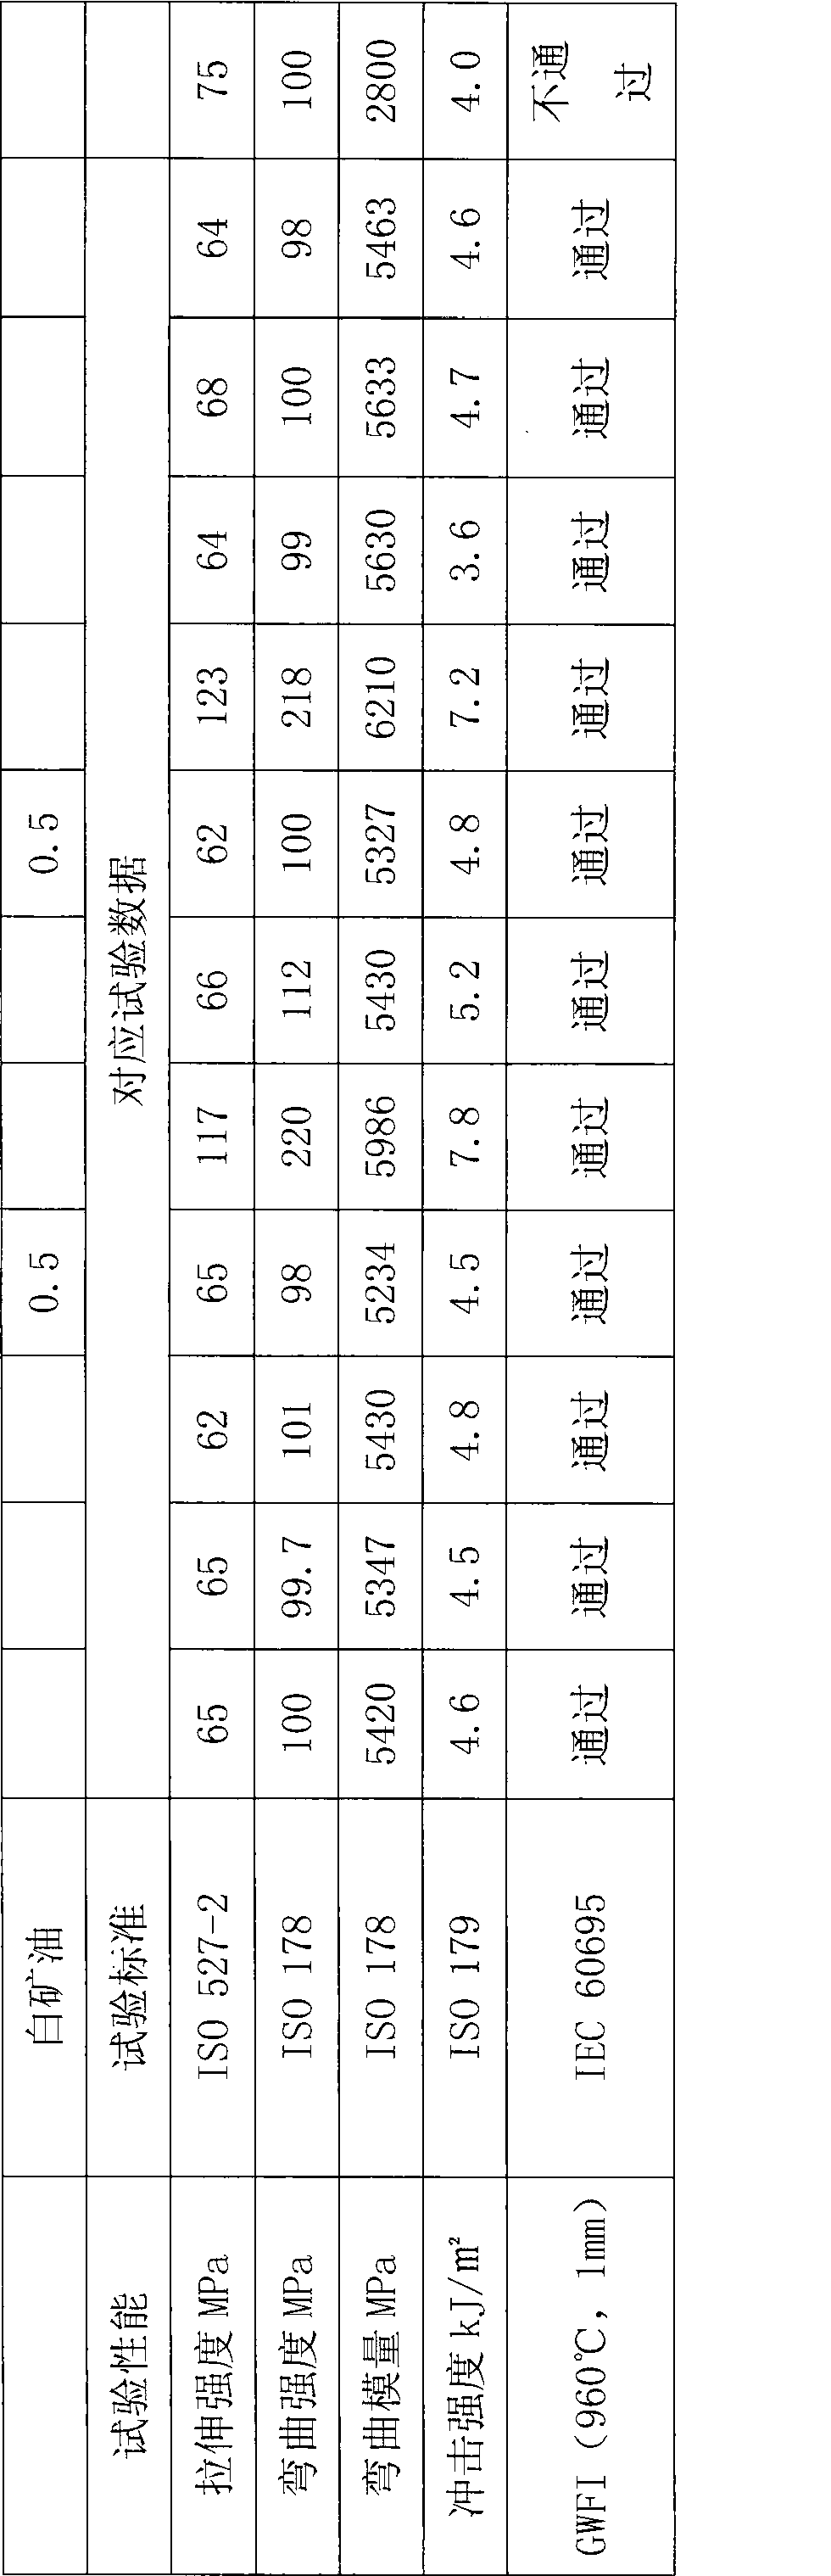 Halogen-free filling flame-retardant nylon 6 composite material and preparation method thereof